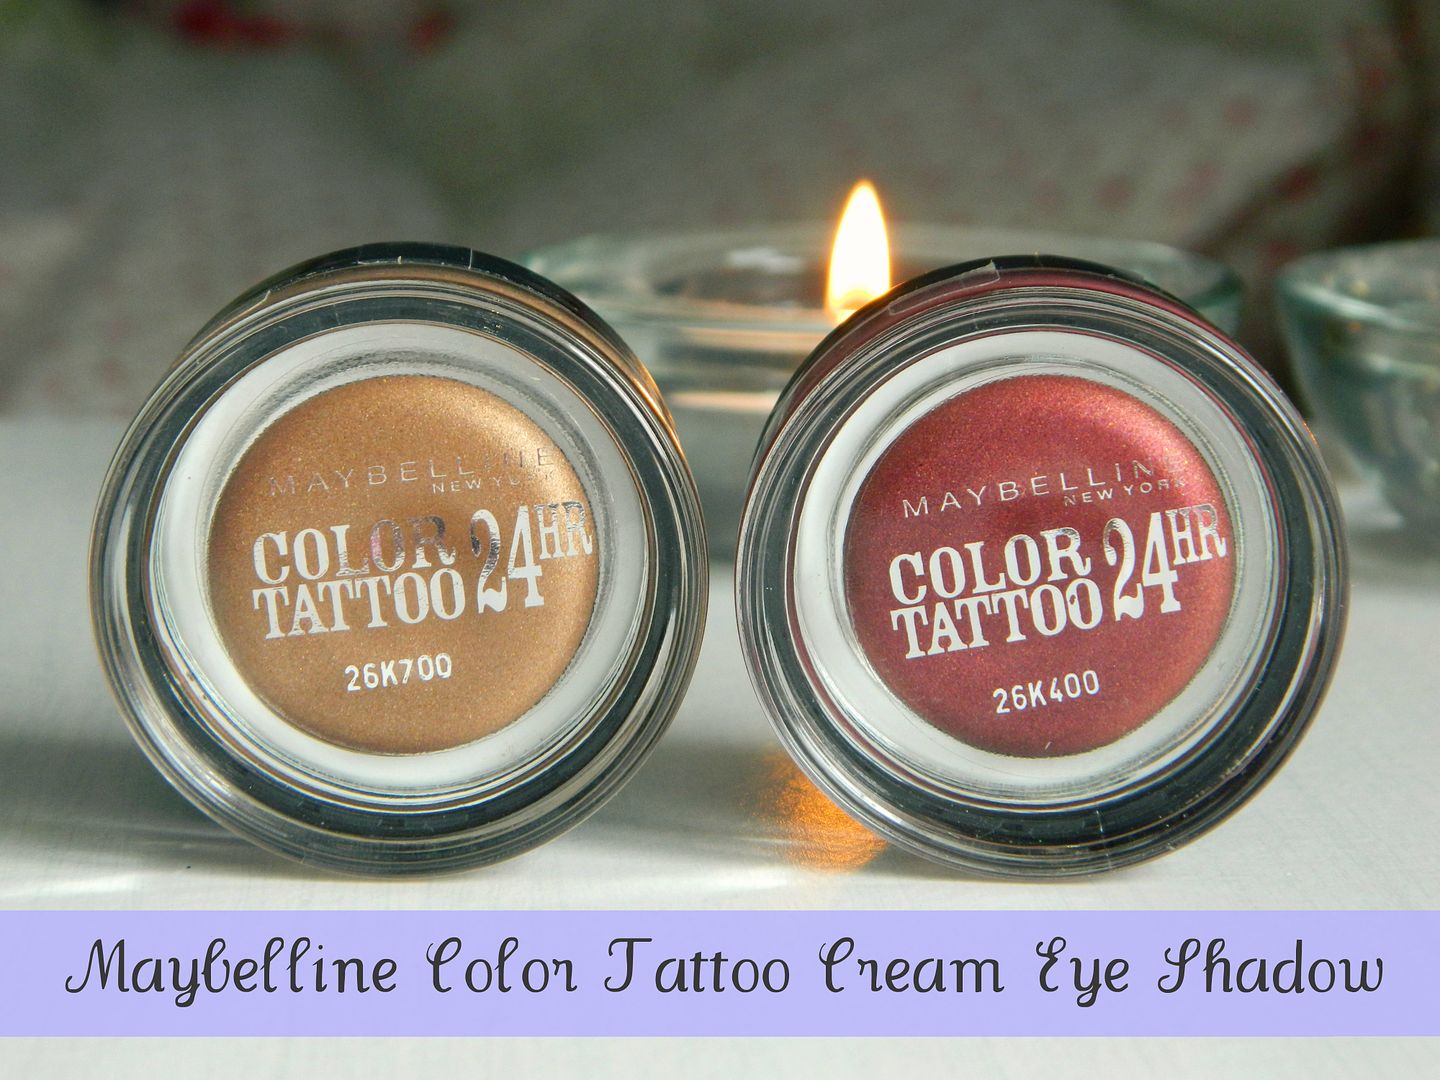 Maybelline Color Colour Tattoo 24 Hours Cream Eye Shadow Review Belle-amie UK Beauty Fashion Lifestyle Blog